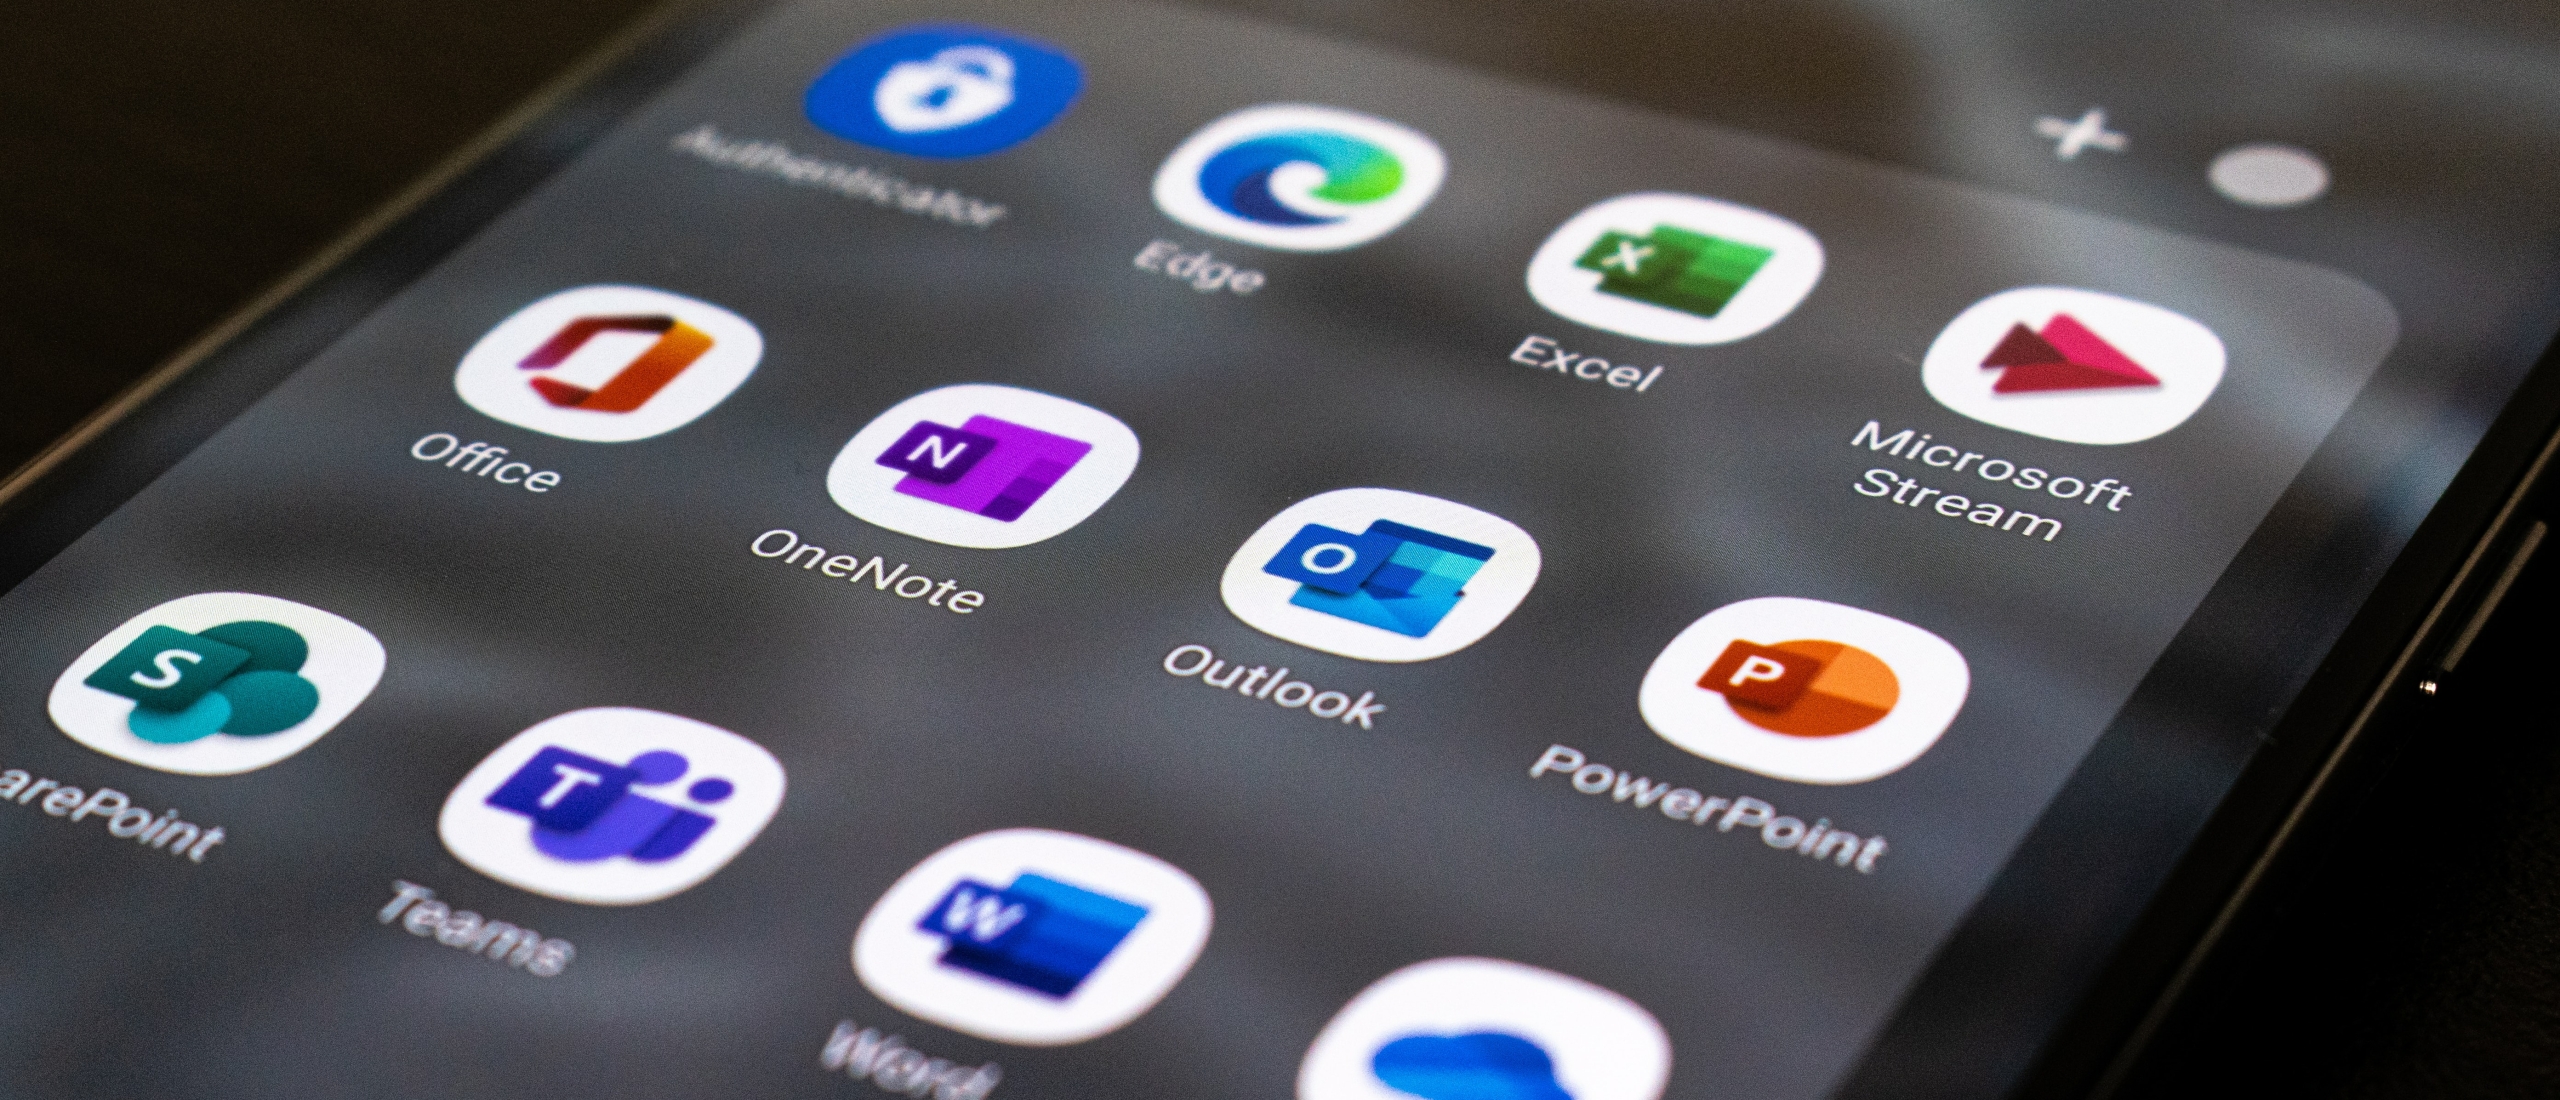 Which applications are included in Office 365?